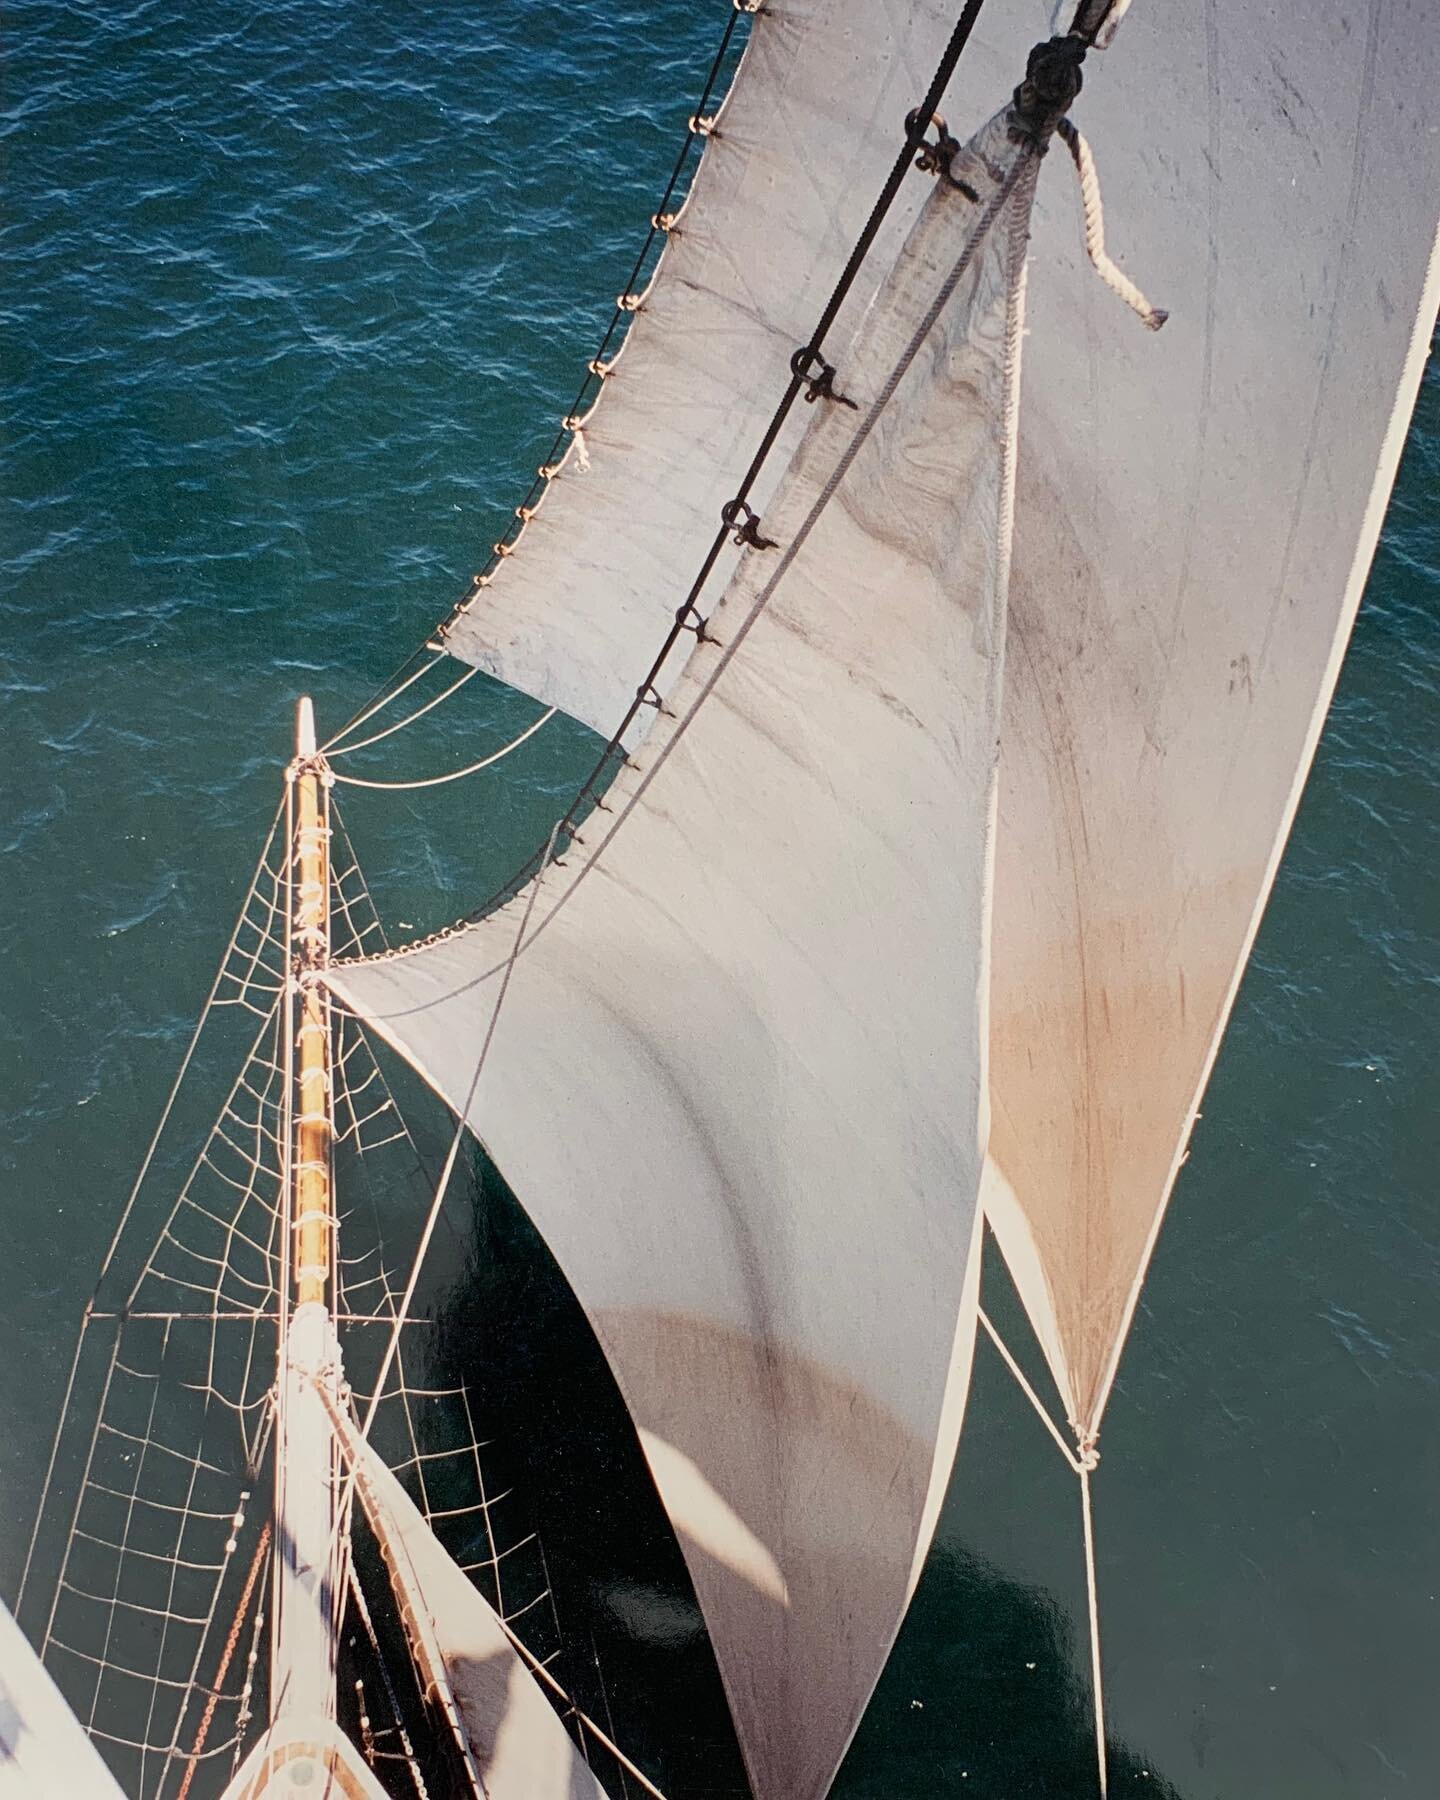 It&rsquo;s a sail! For November&rsquo;s Bandcamp Friday and thru Sunday, enter the discount code word: SAIL for 20% off any purchase from fo&rsquo;c&rsquo;sle.(photo taken aloft by @tree_wong circa 1995 while working aboard the schooner Californian)